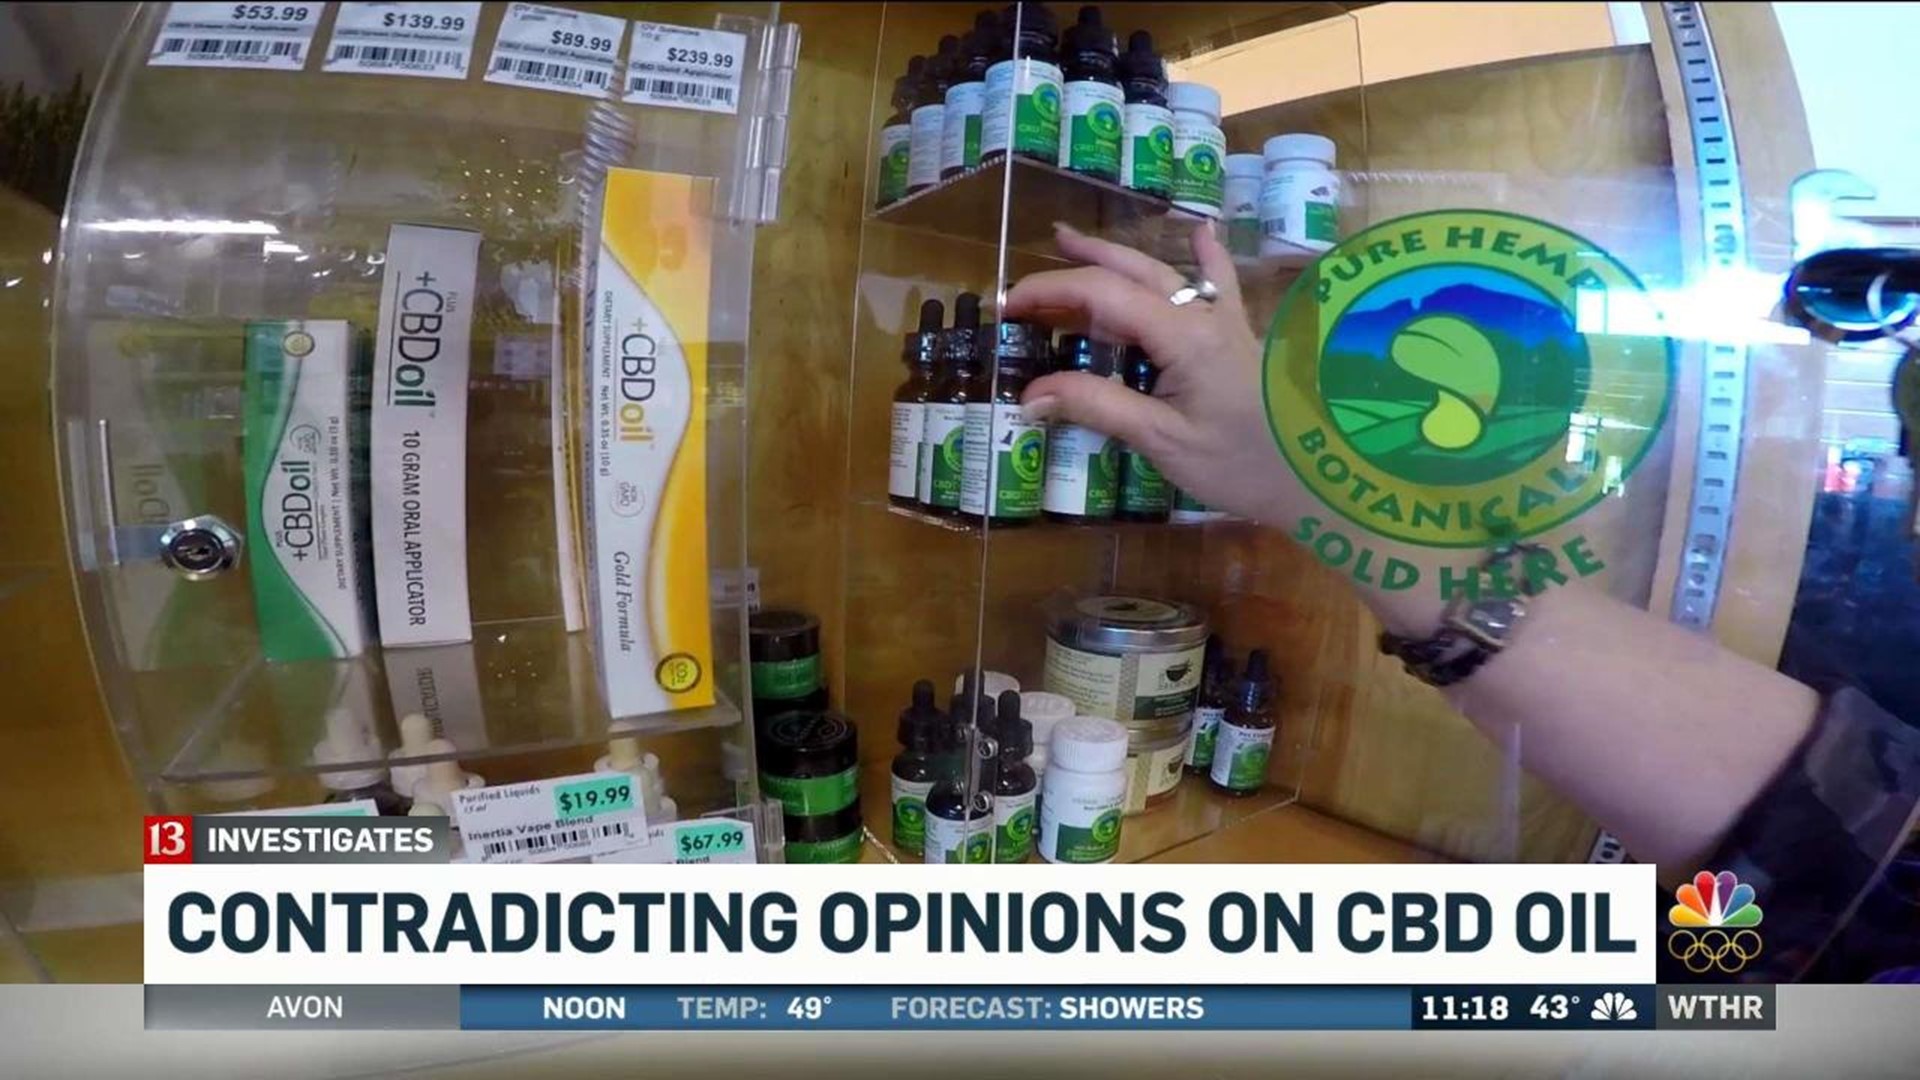 Differing opinions on legality of CBD oil